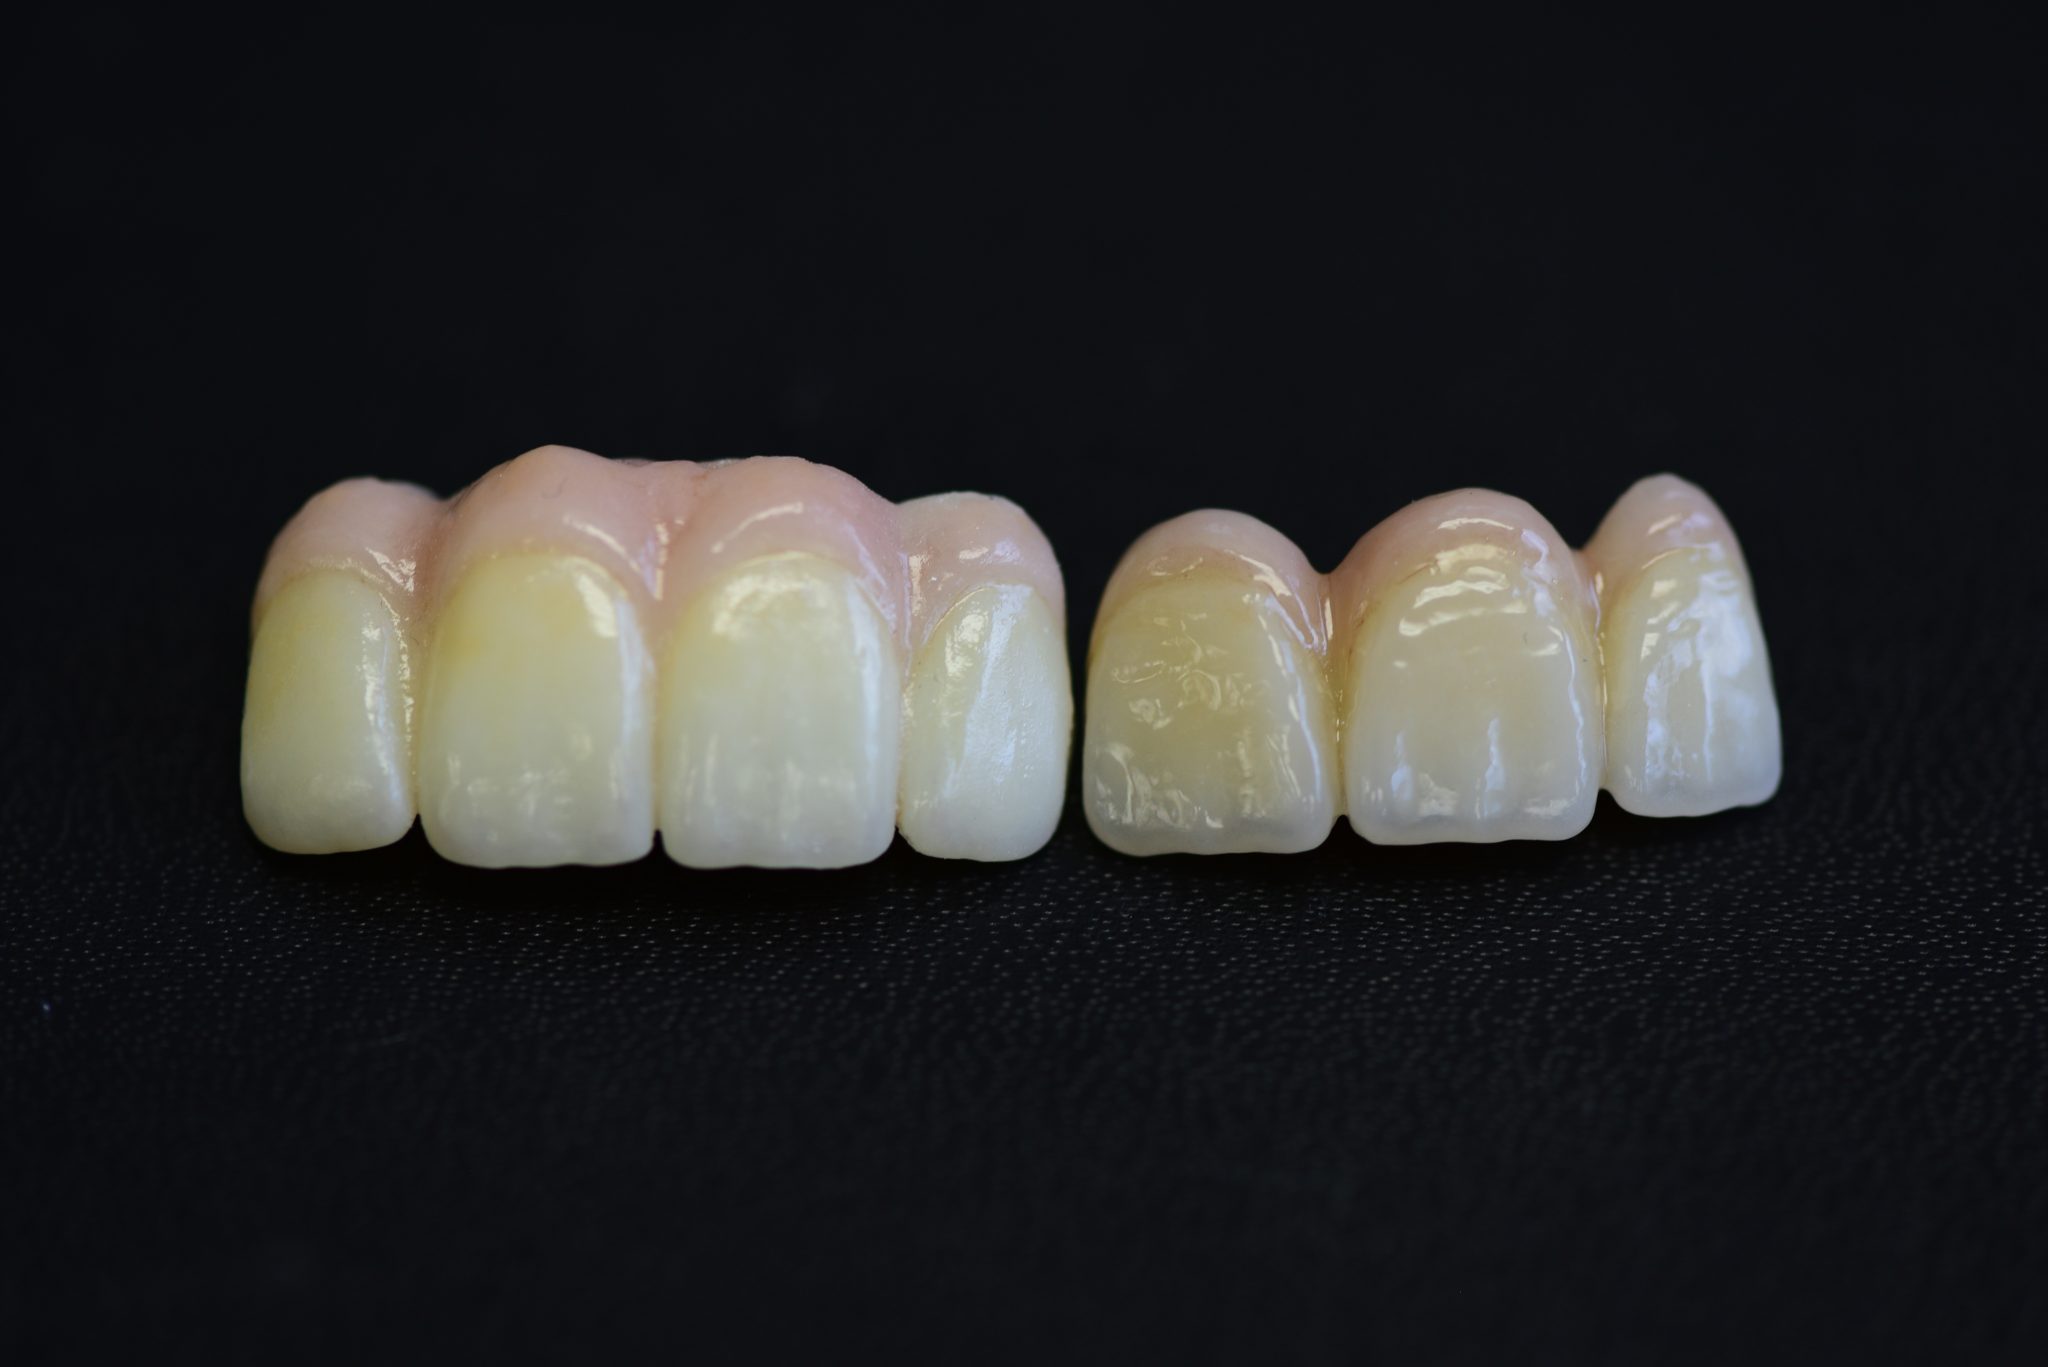 emax-crowns-vs-zirconia-crowns-the-beauty-and-the-beast-schack